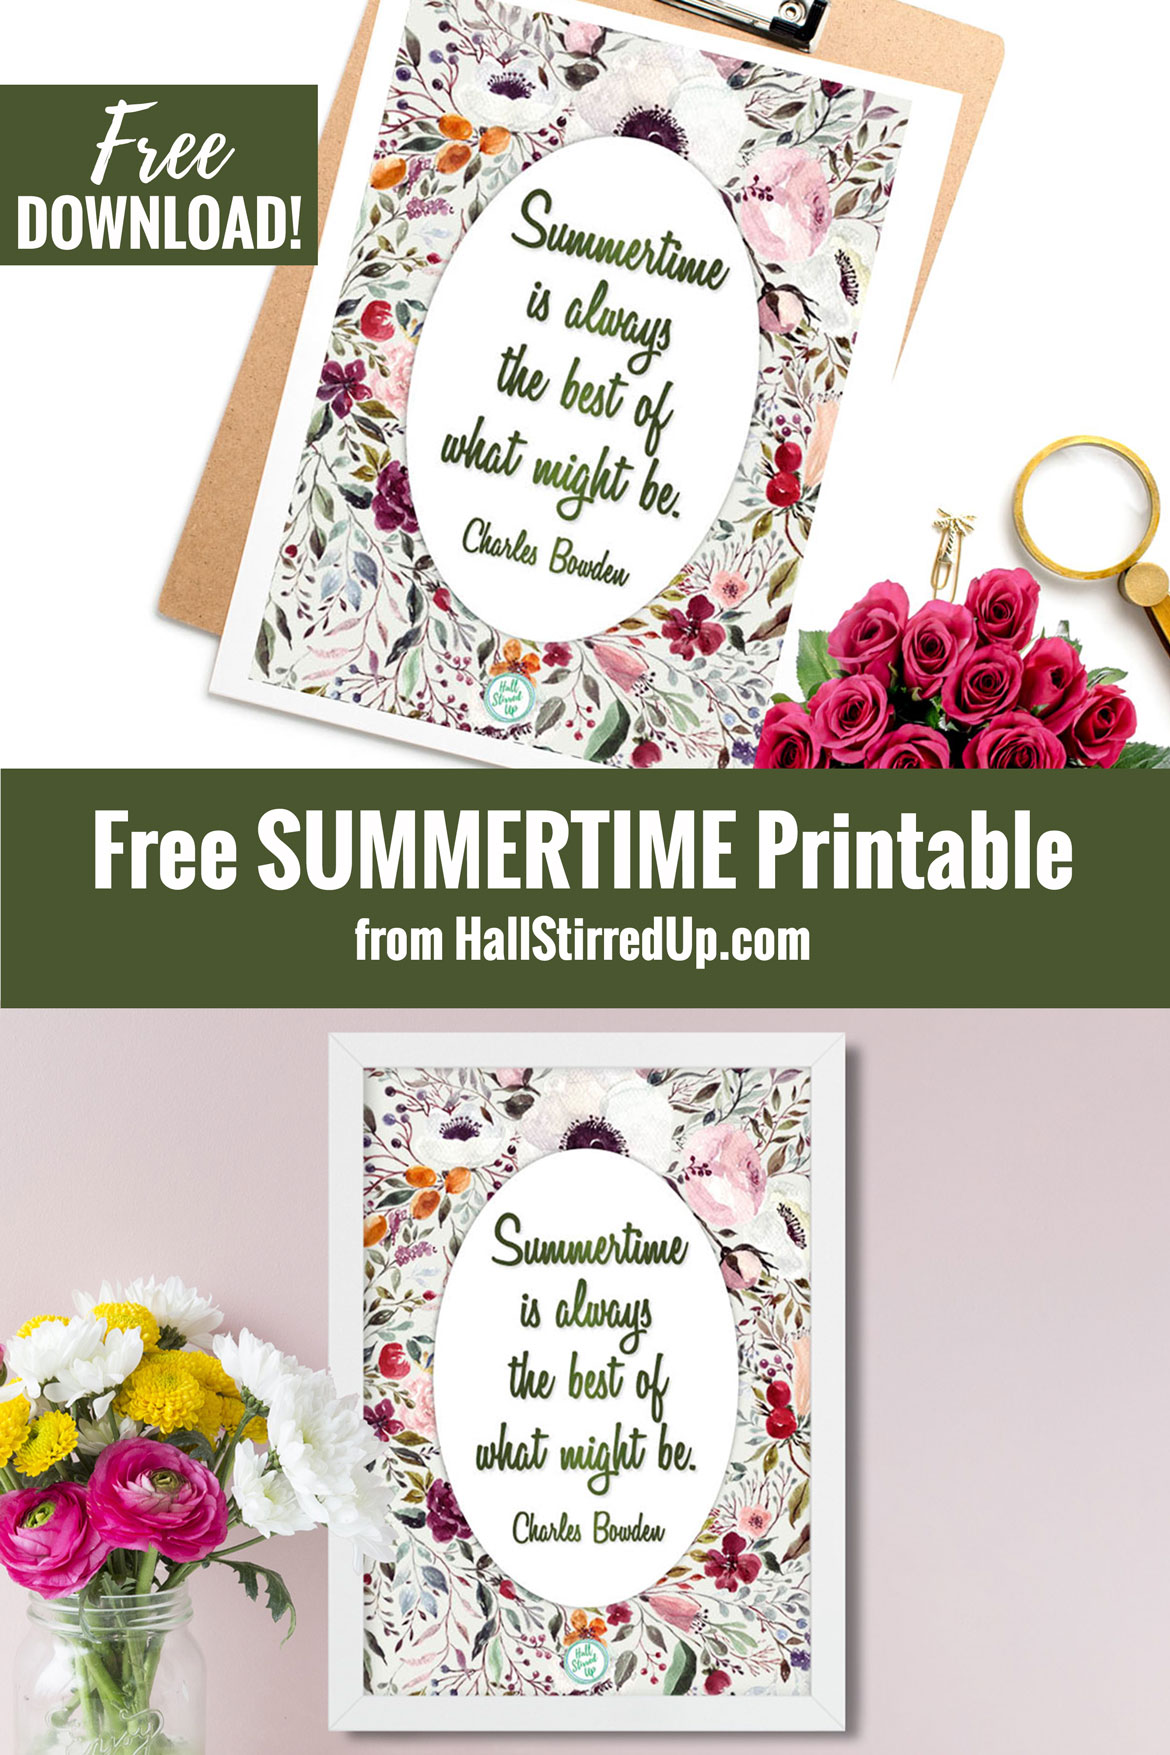 Let's celebrate summertime with a pretty free printable